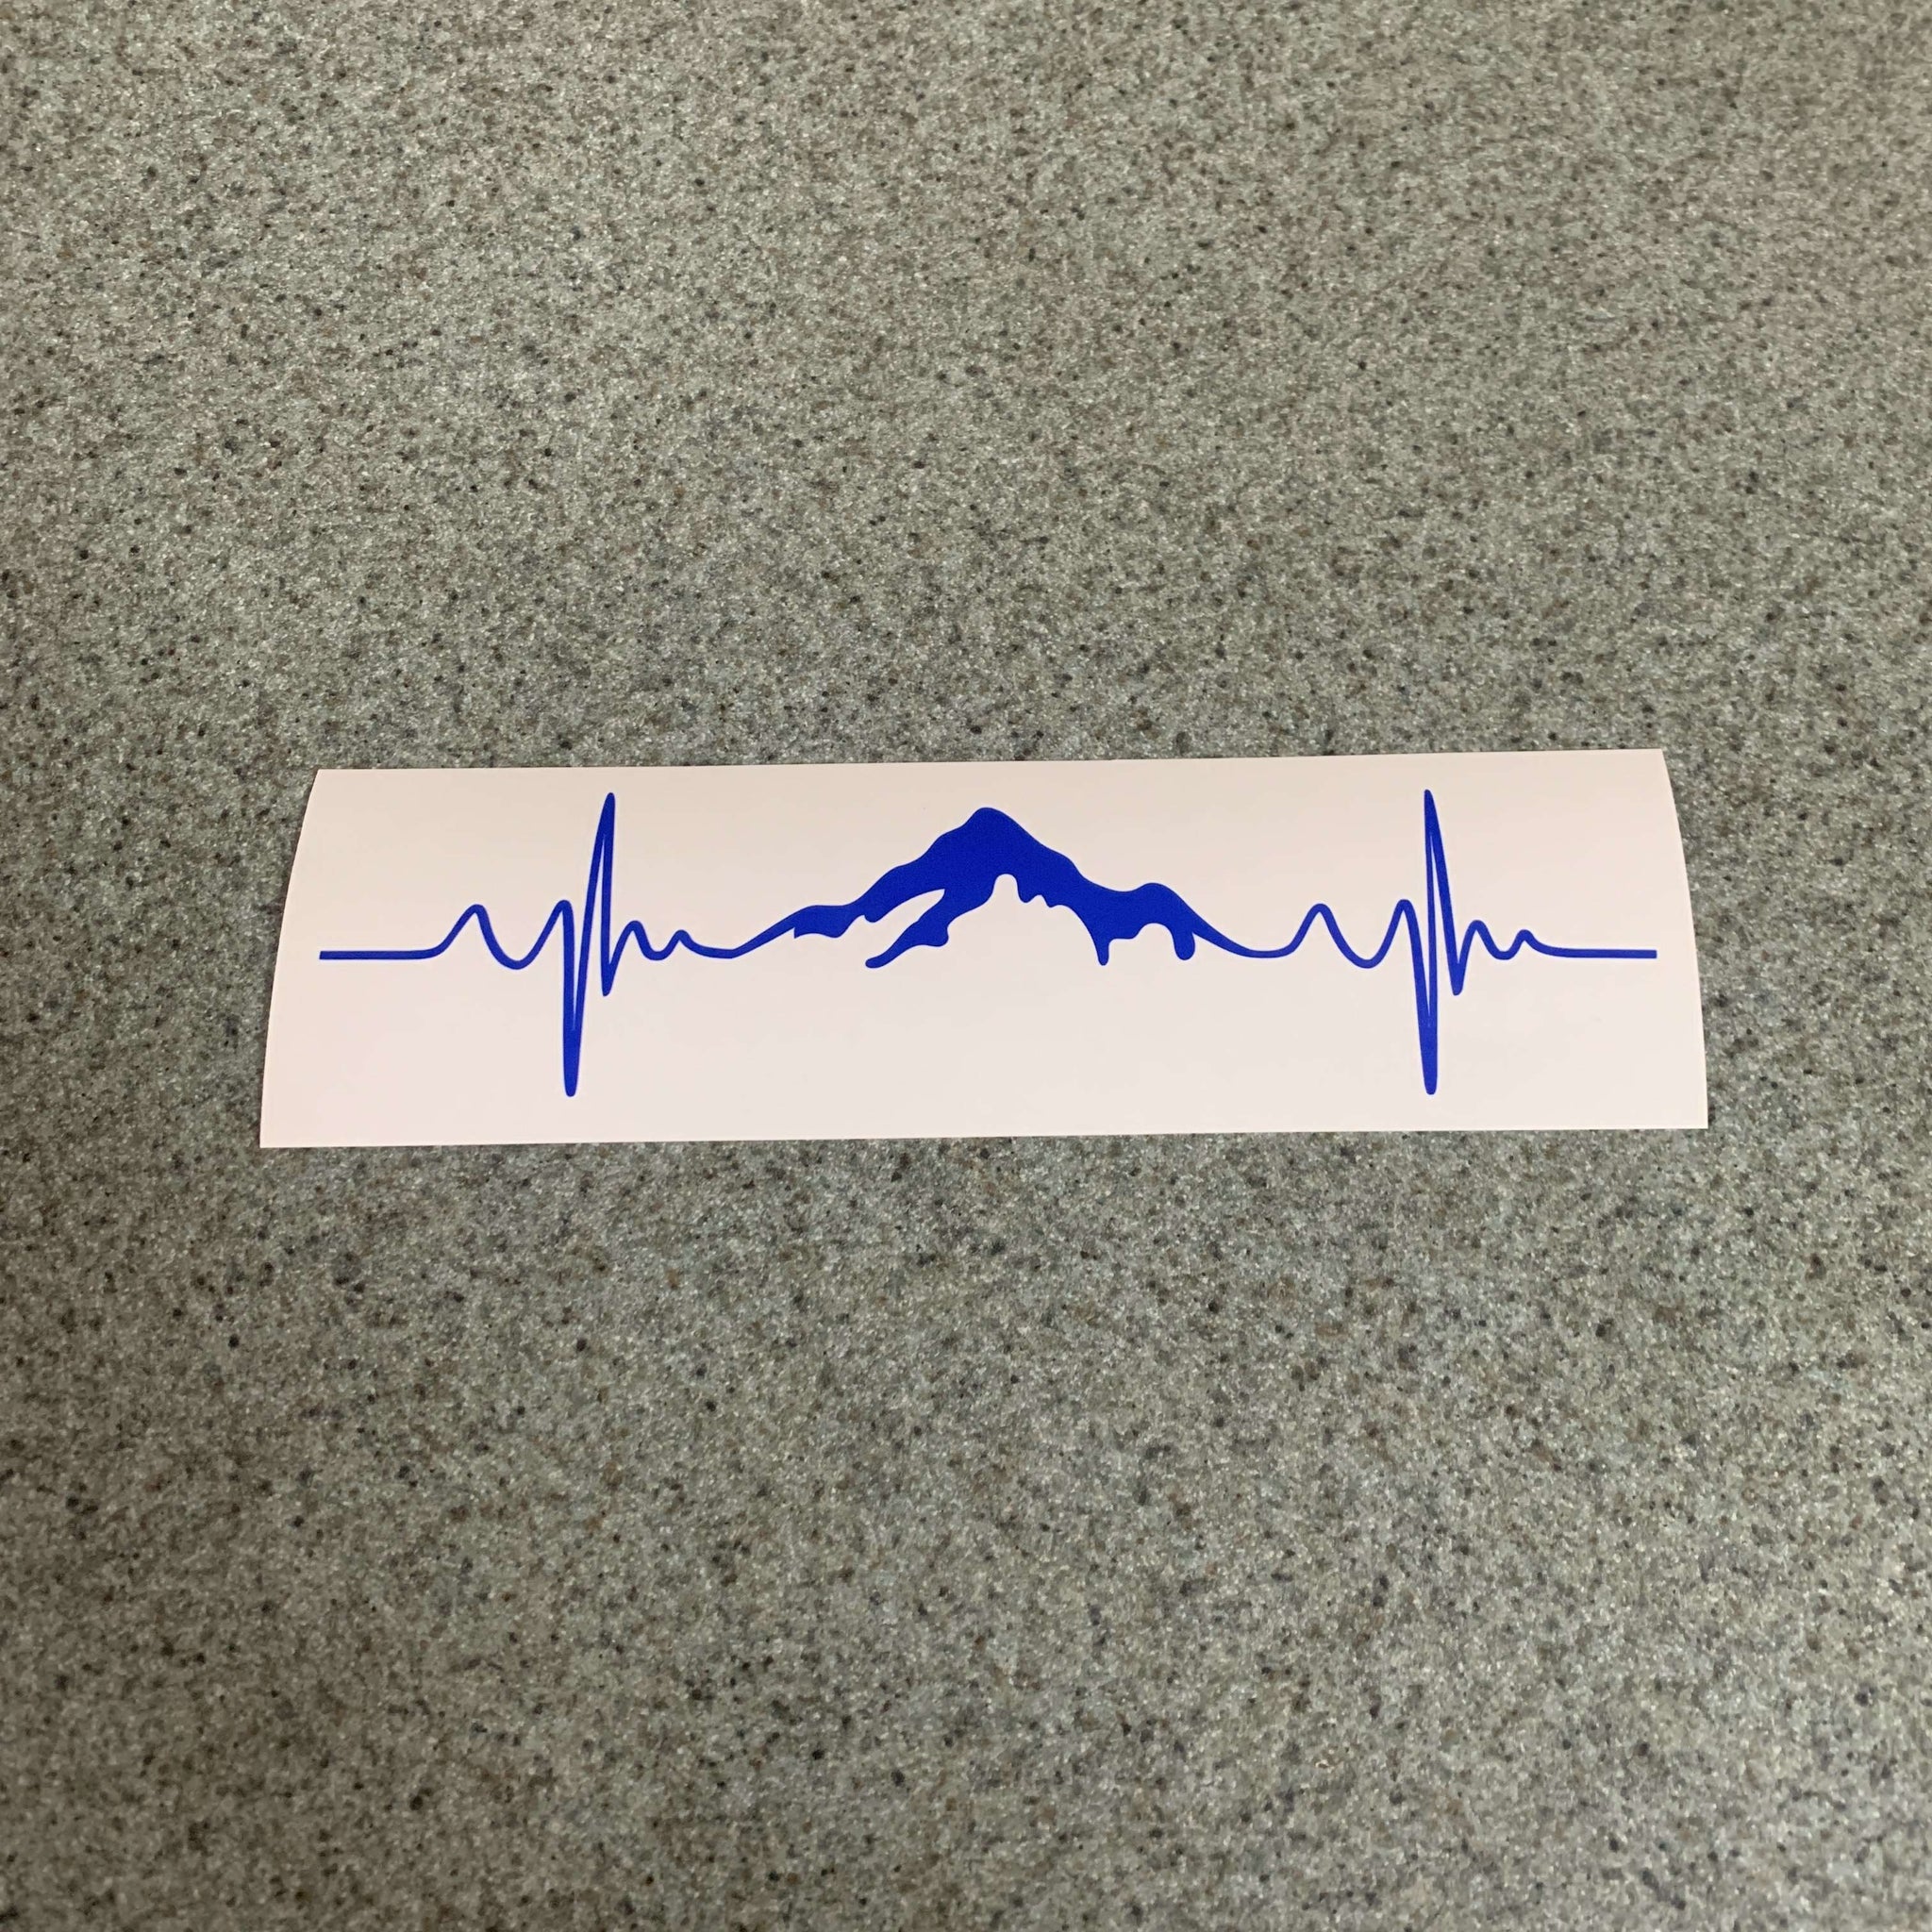 HEARTBEAT SILHOUETTE VINYL Decal for Home Auto Car Window Wall Door Laptop  Music $10.00 - PicClick